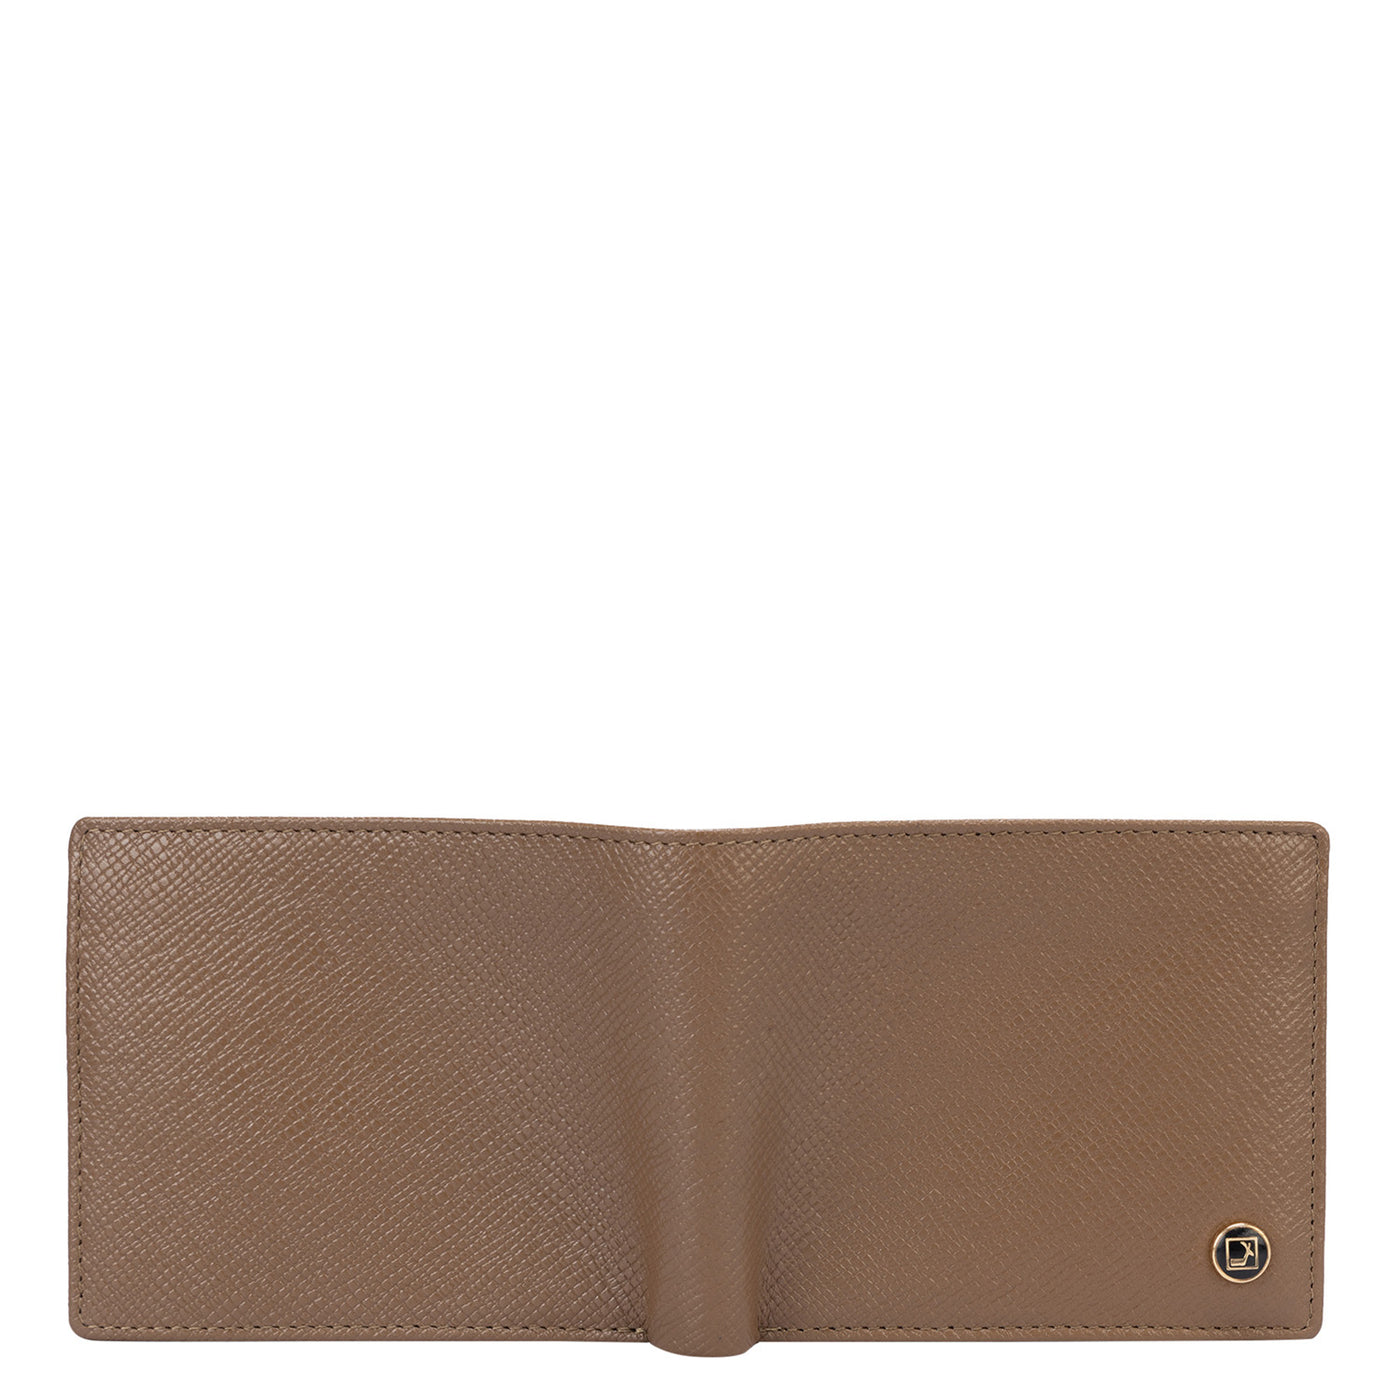 Franzy Leather Mens Wallet - Cafe